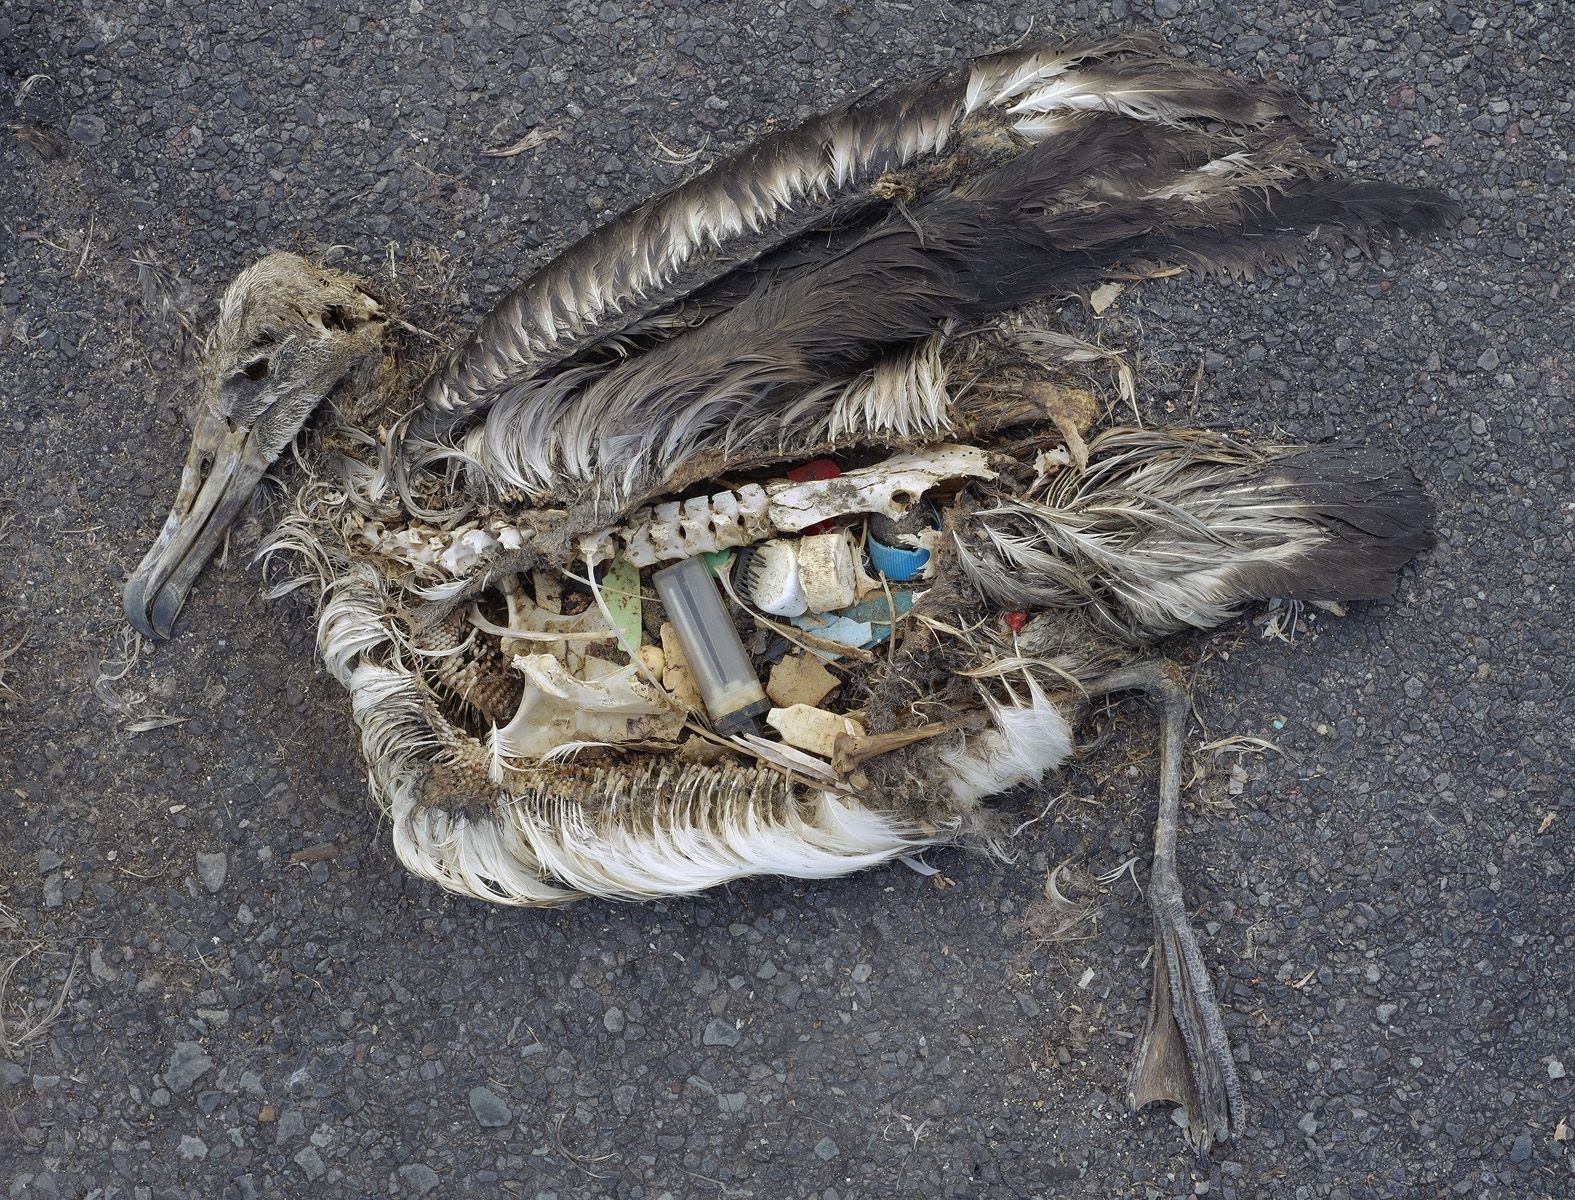 The unaltered stomach contents of a dead albatross chick include plastic marine debris fed the chick by its parents.